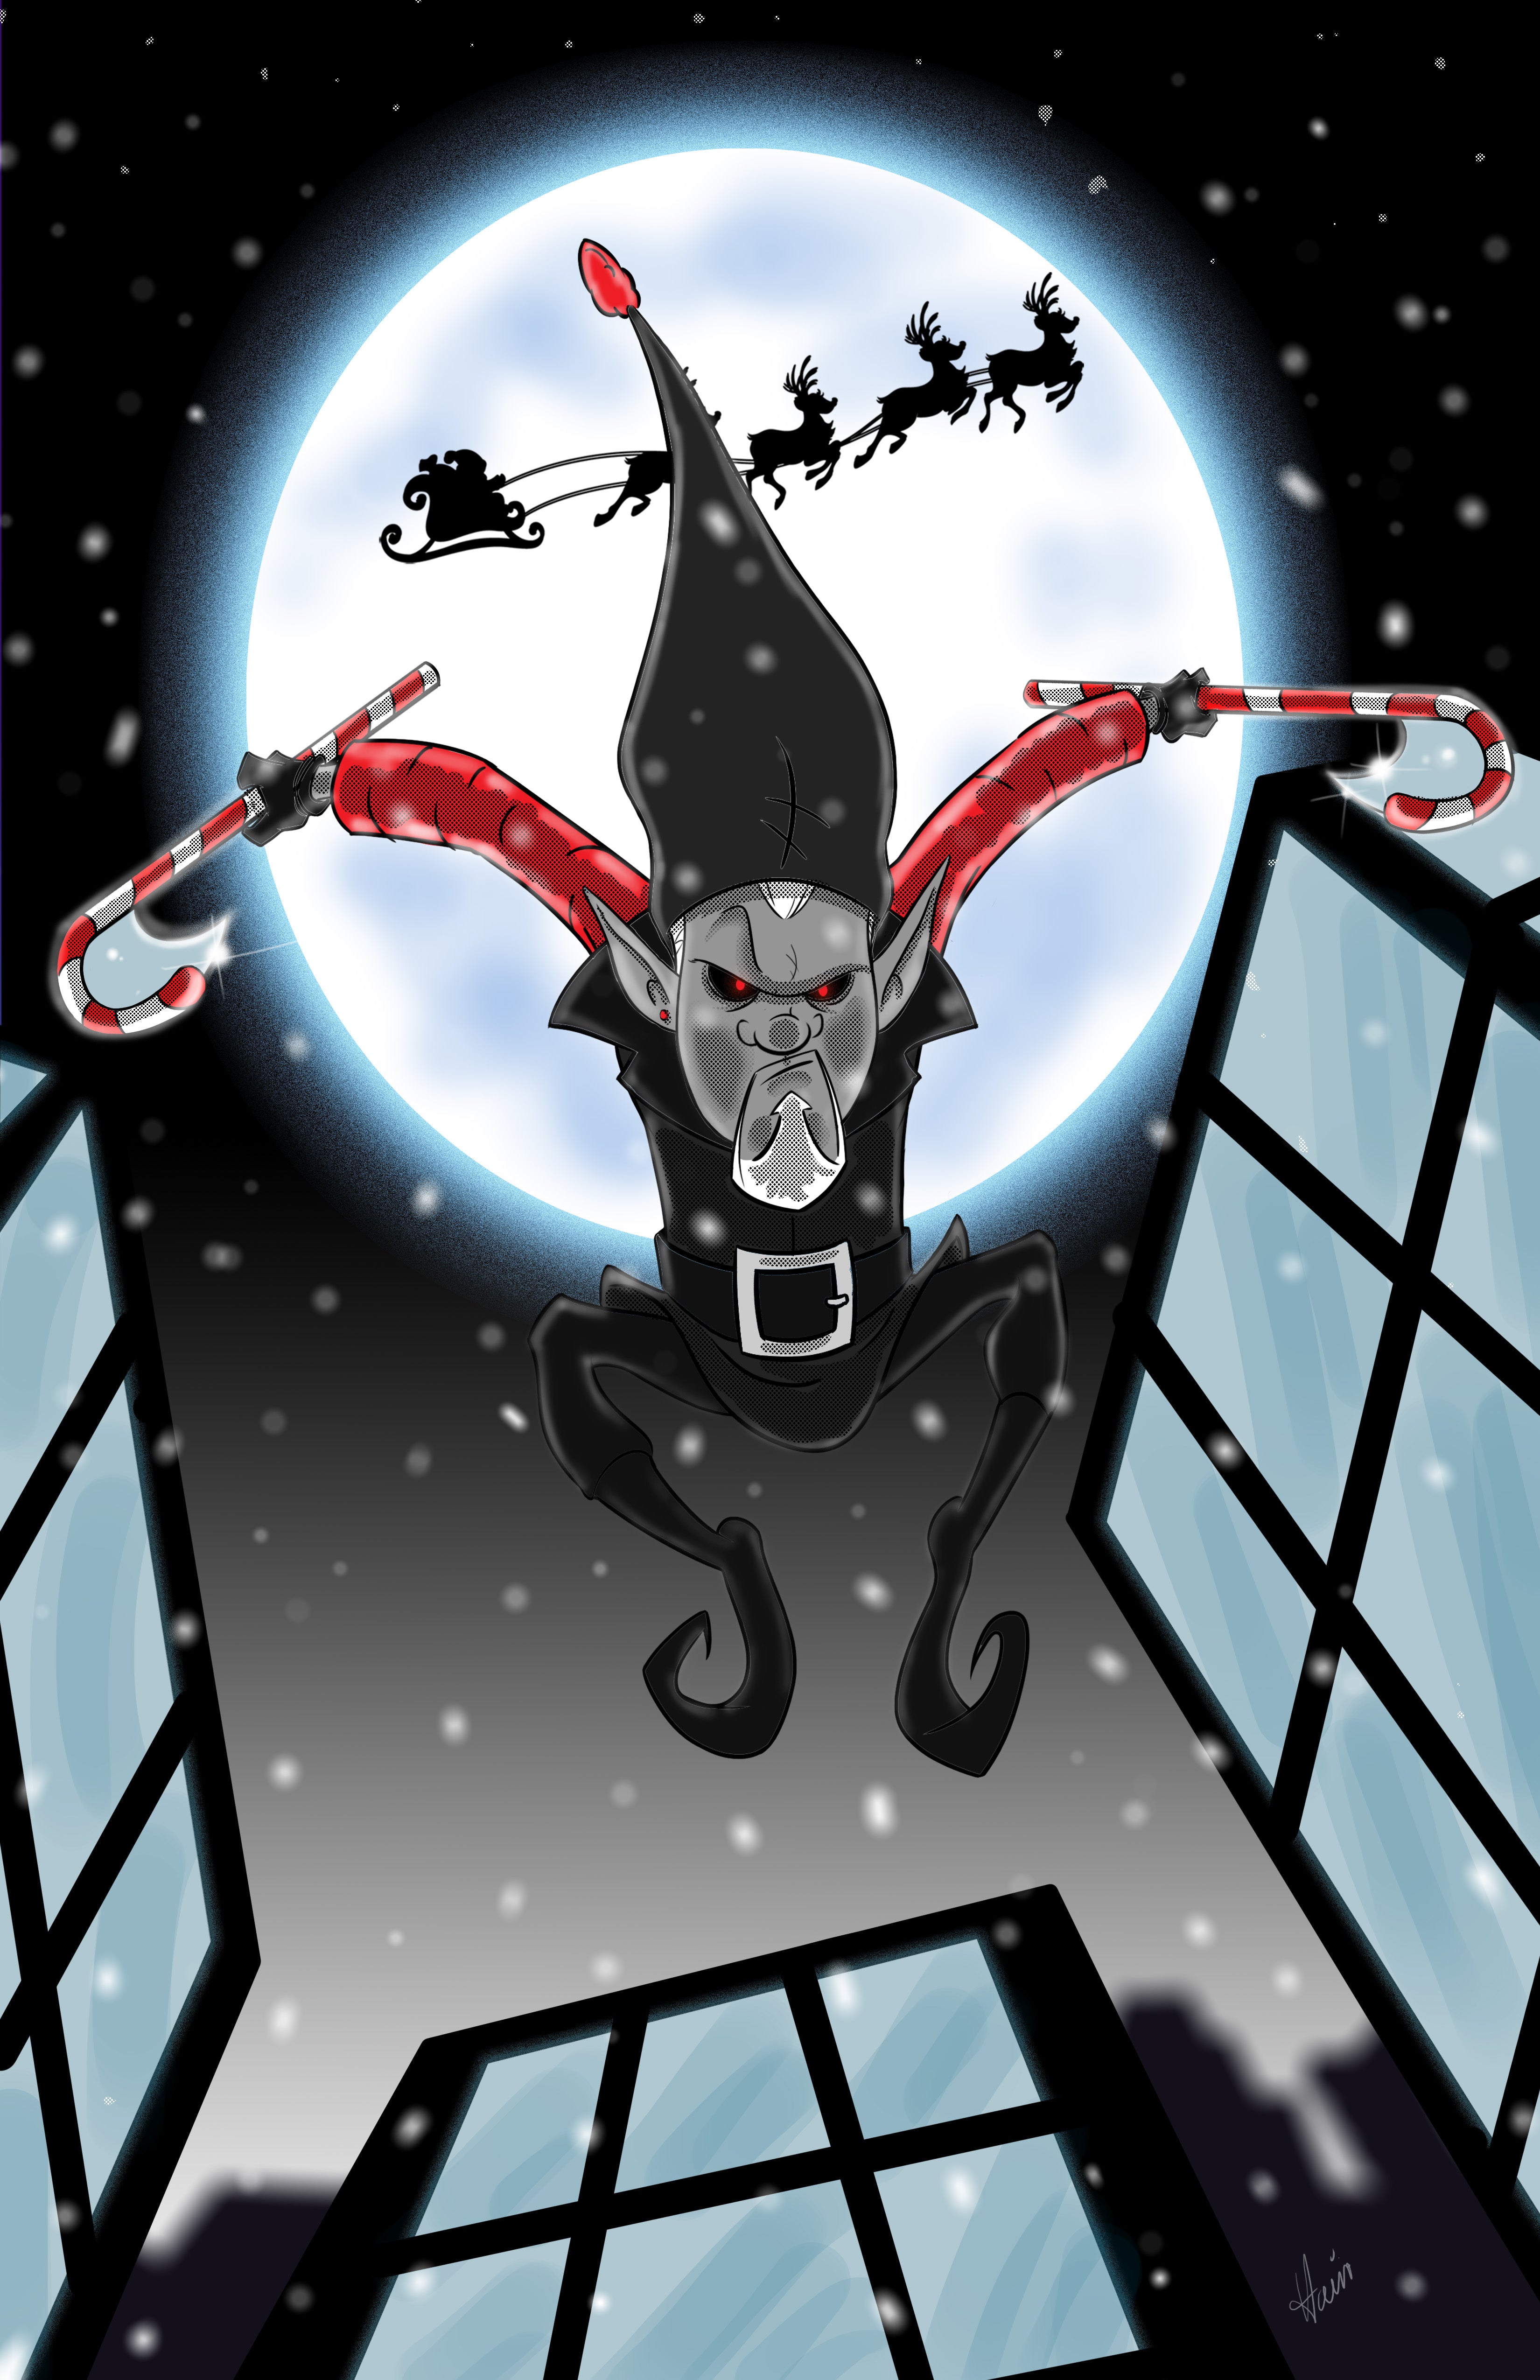 Poster of Hit-Elf assassin flying in the against a black sky on Christmas Eve